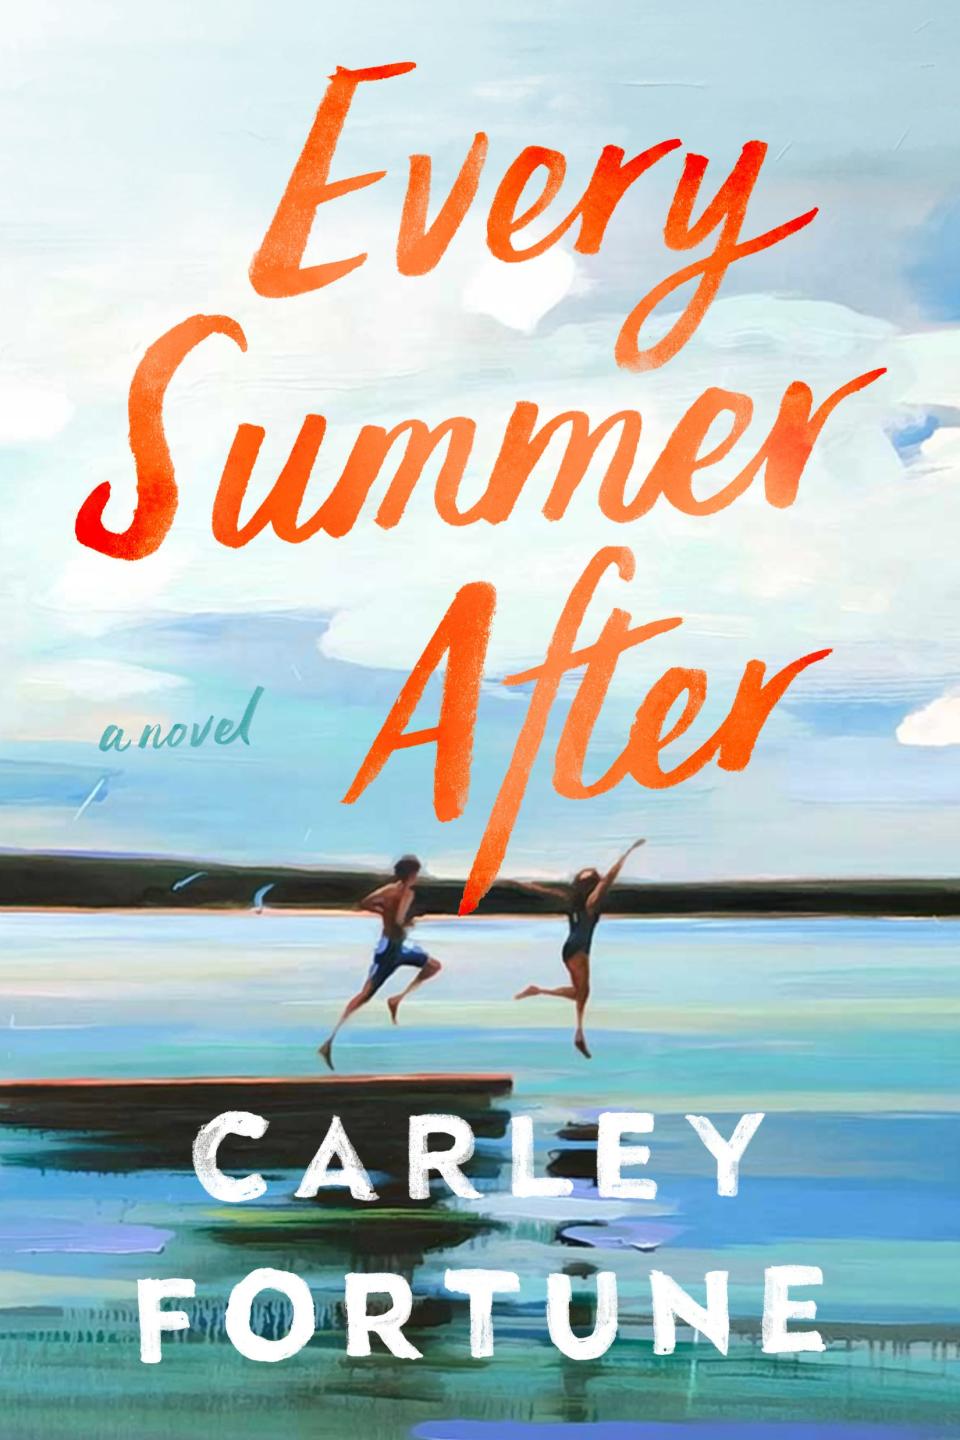 "Every Summer After," by Carley Fortune